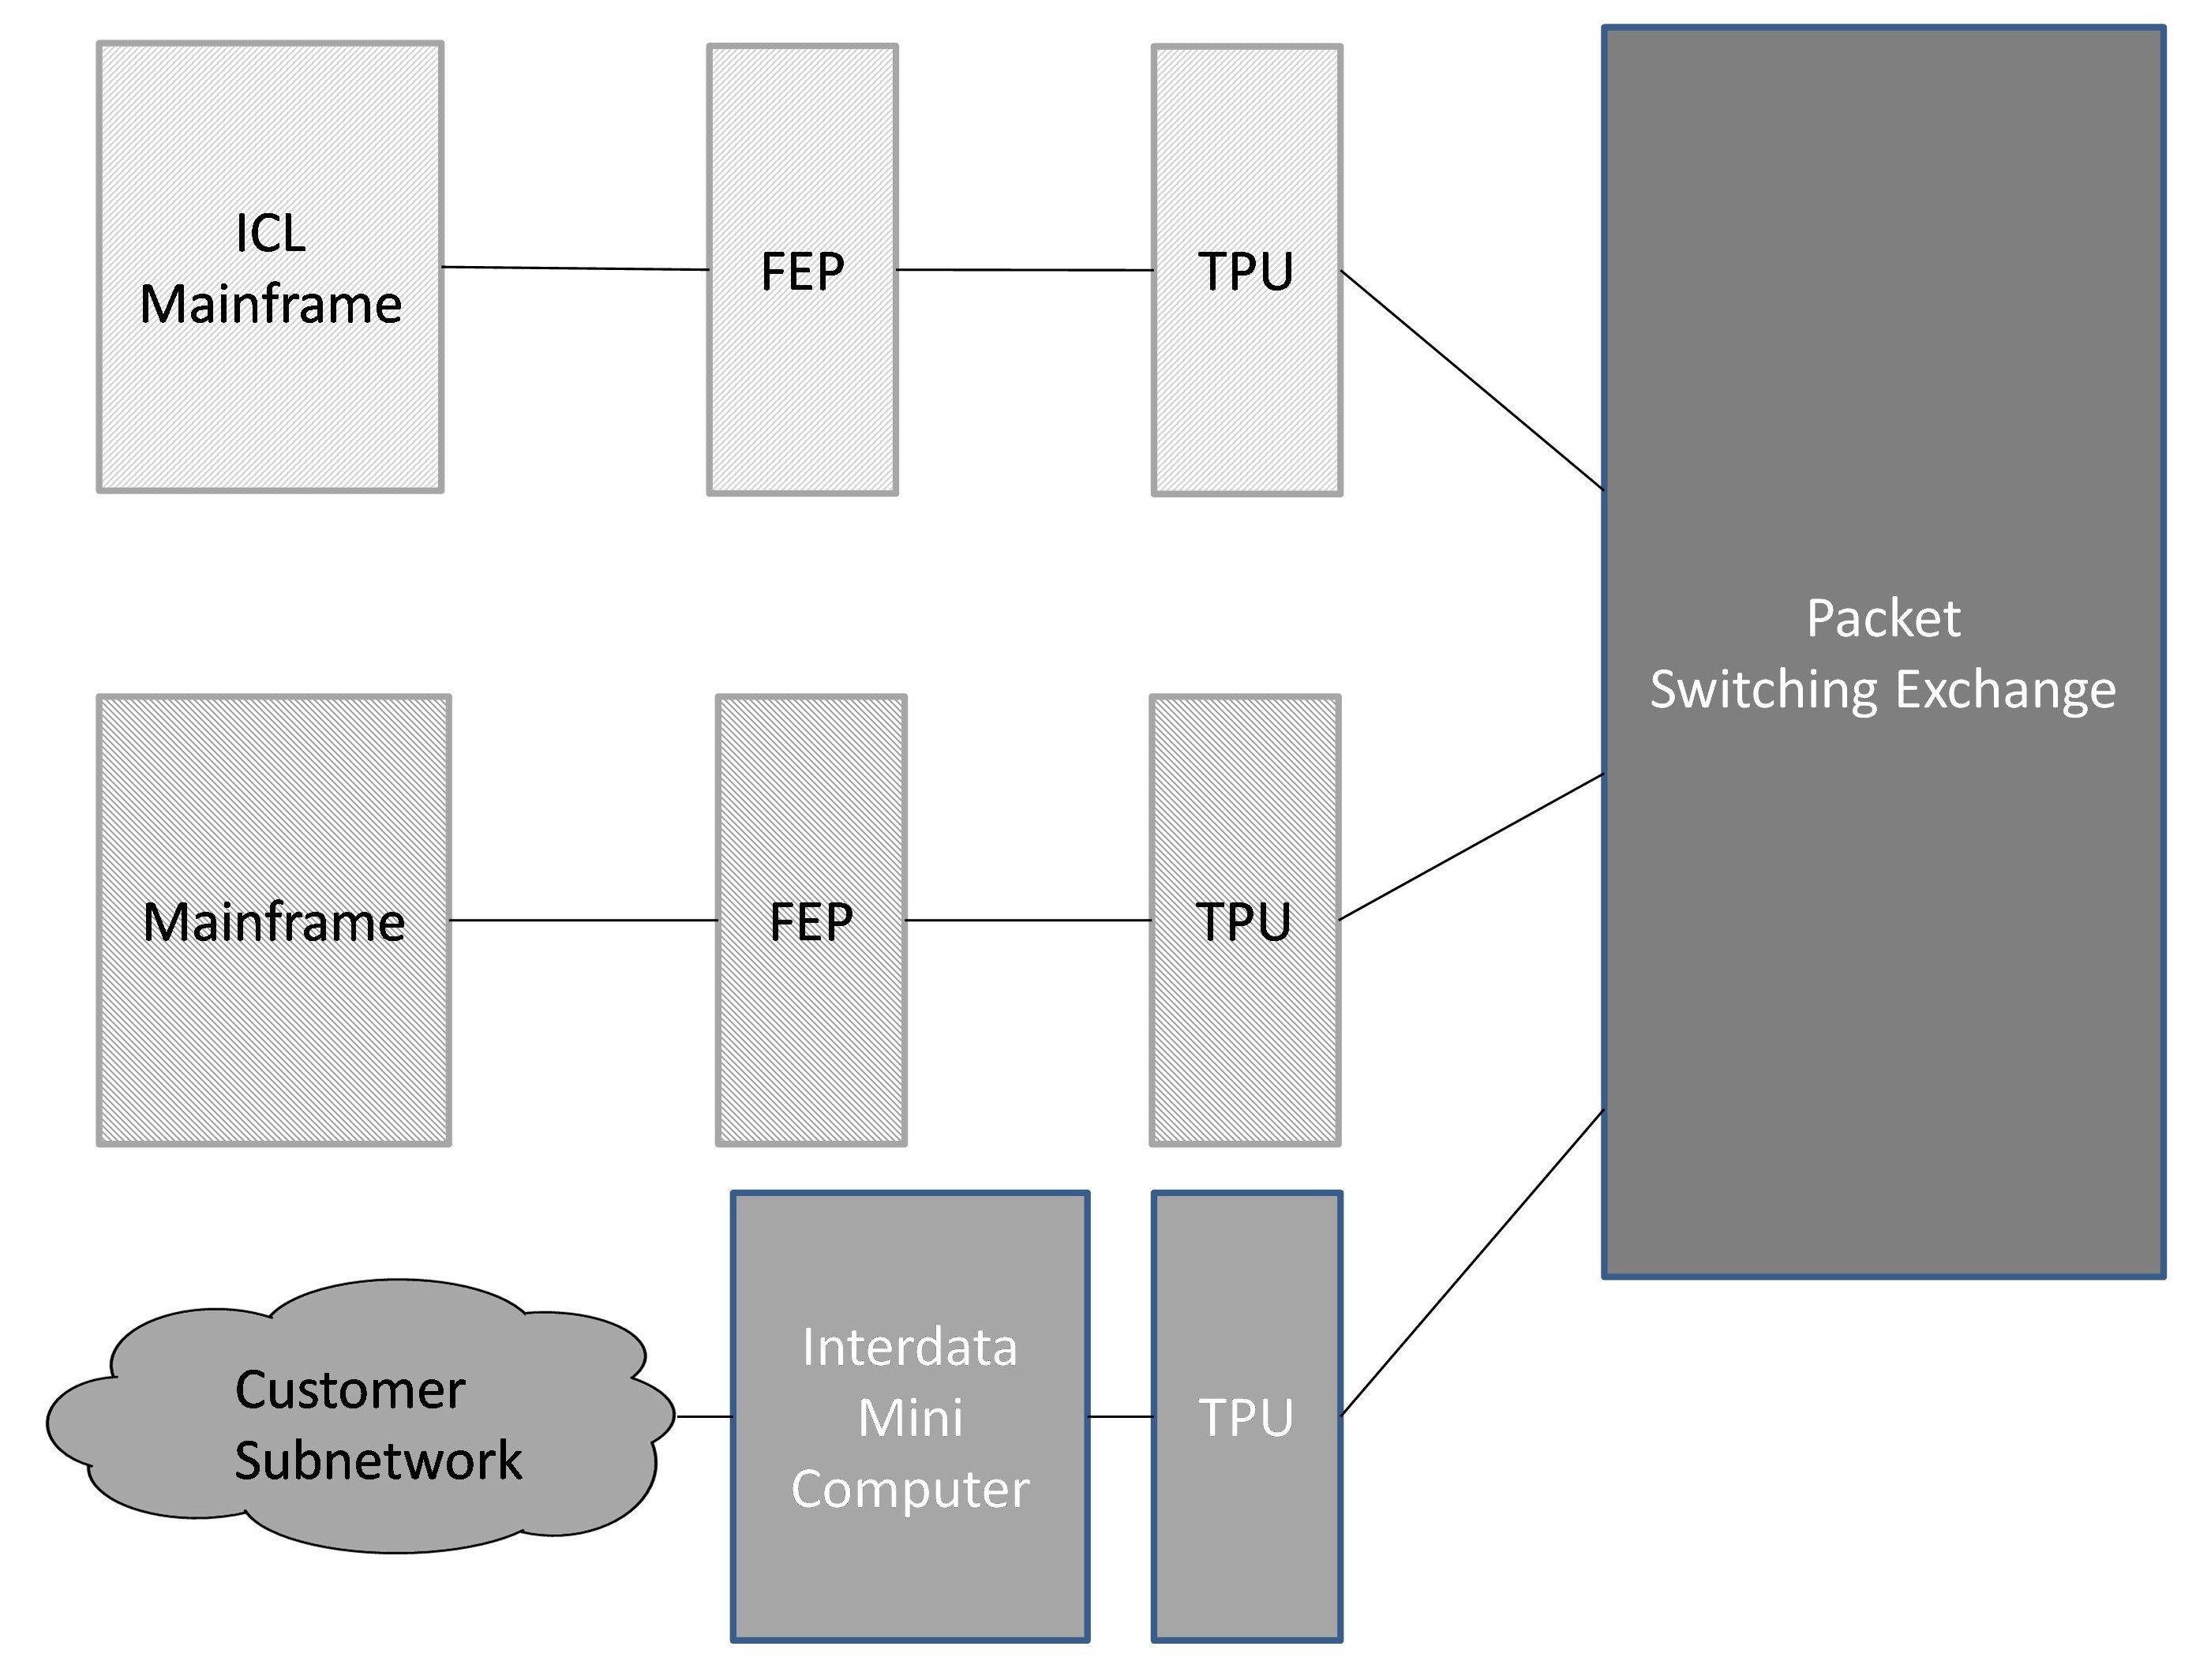 Interfacing to the EPSS system